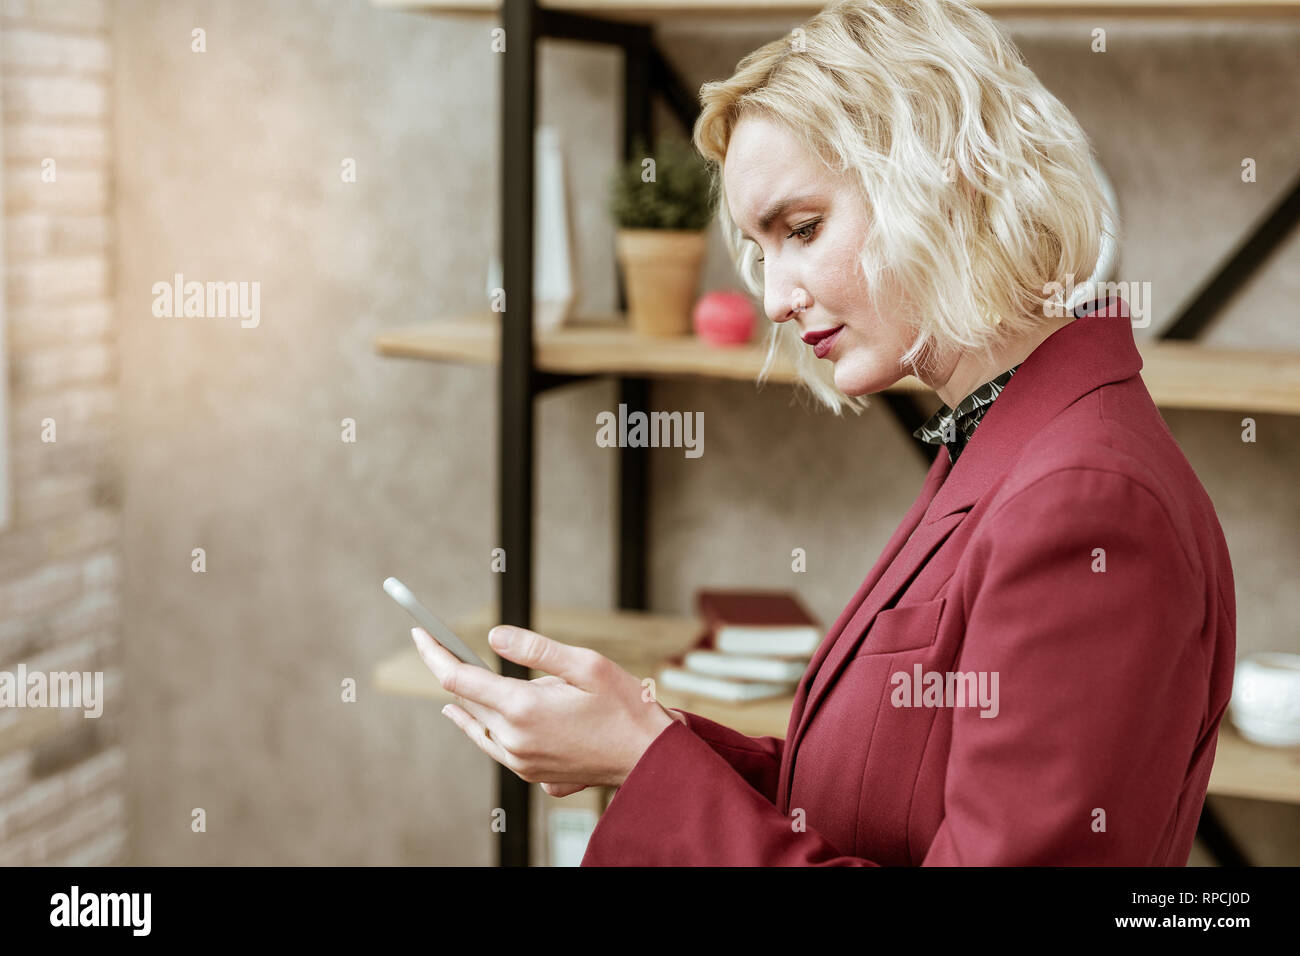 Serious blonde woman staring on smartphone screen Stock Photo